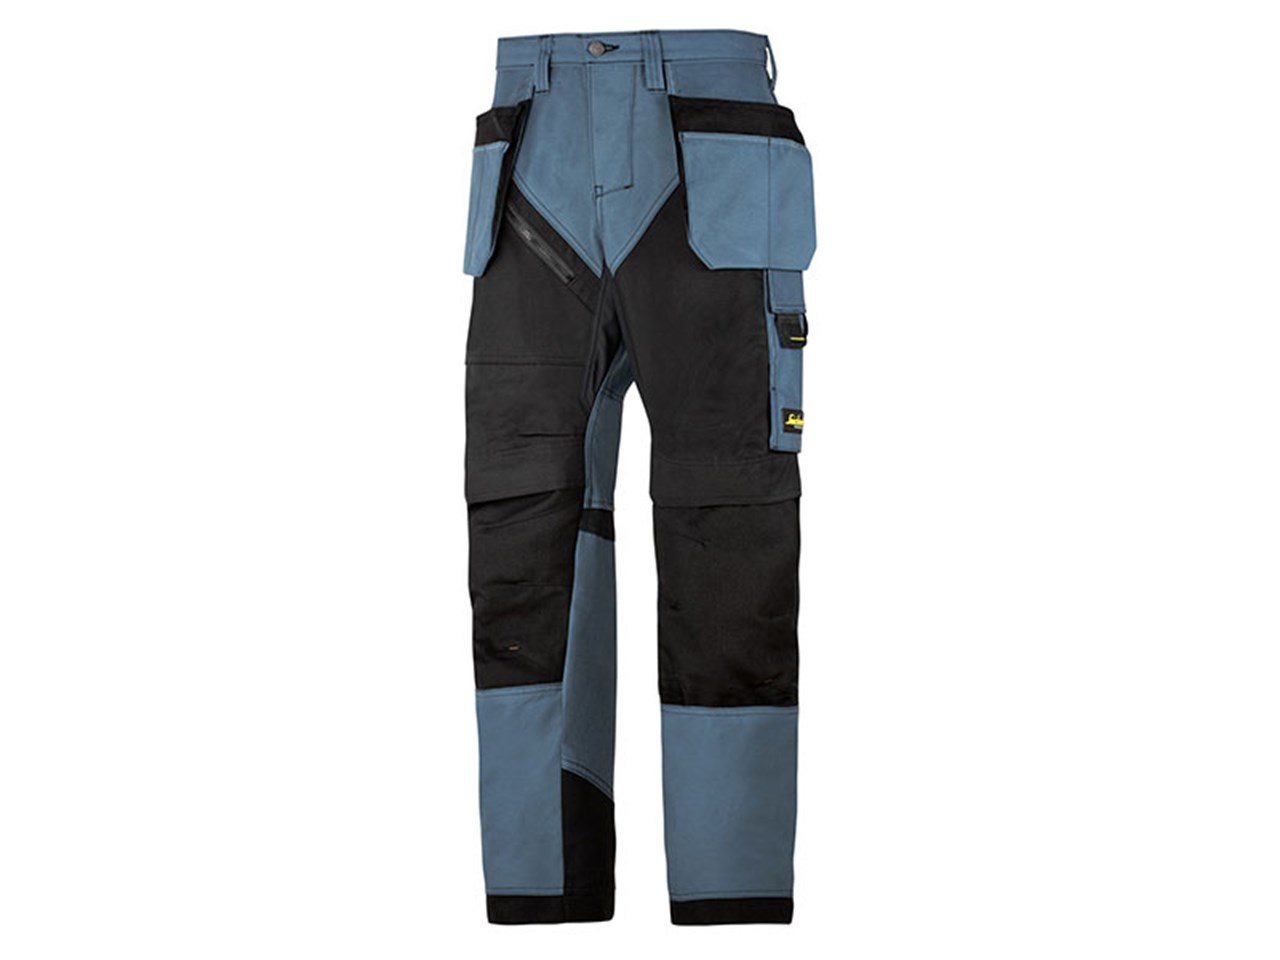 Snickers 62035104056 RuffWork Work Trousers Holster Pockets 39R Petrol